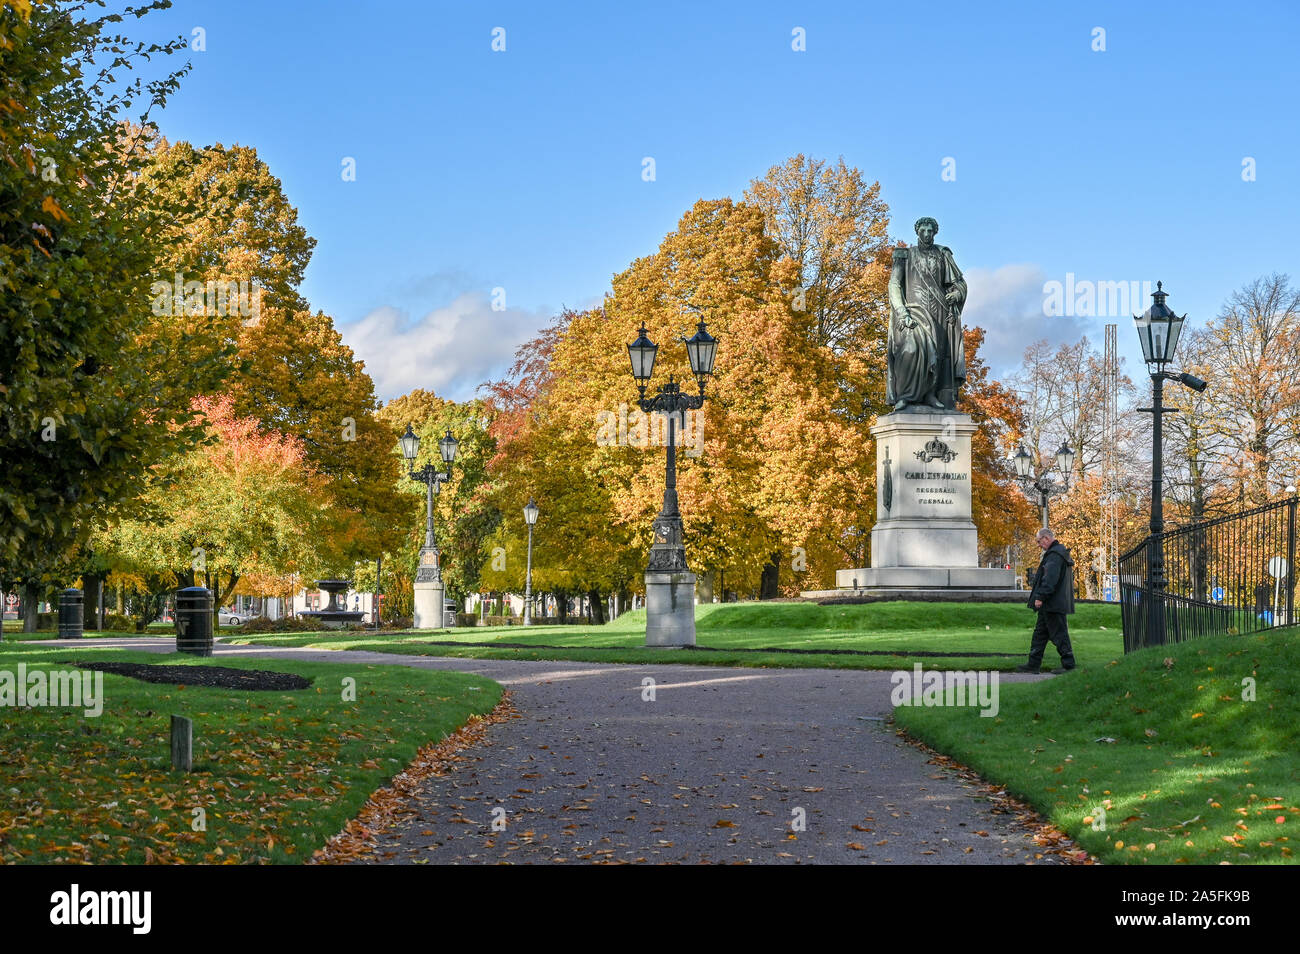 Carl Johans park with the statue of king Karl Johan XIV during fall in Norrkoping, Sweden. Karl Johan was the first king of the Bernadotte family. Stock Photo